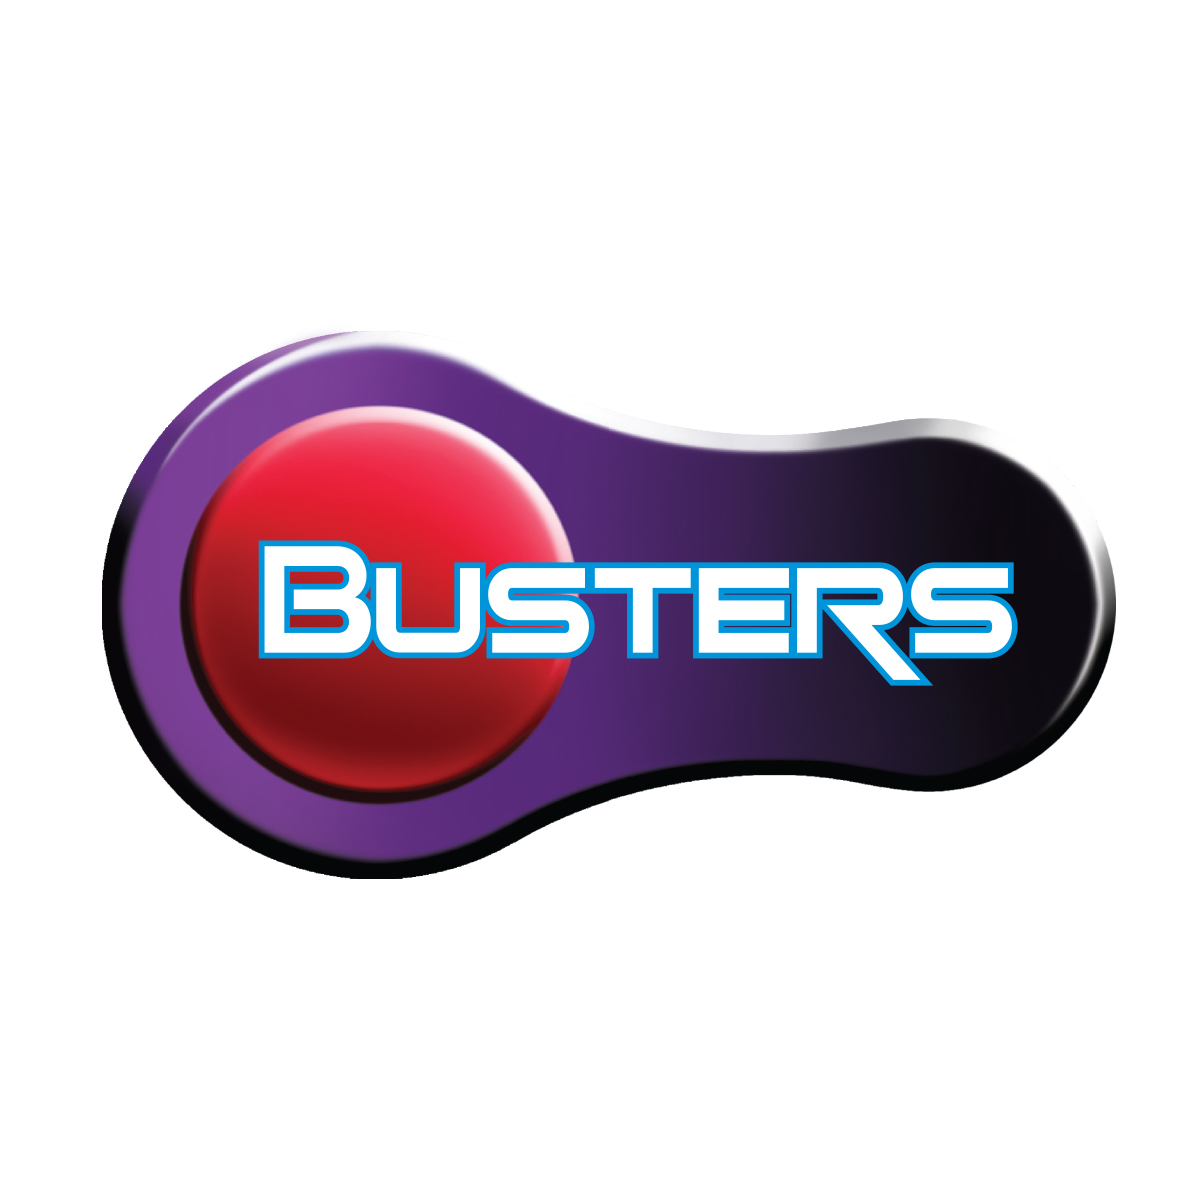 Busters, Next Musarambagh